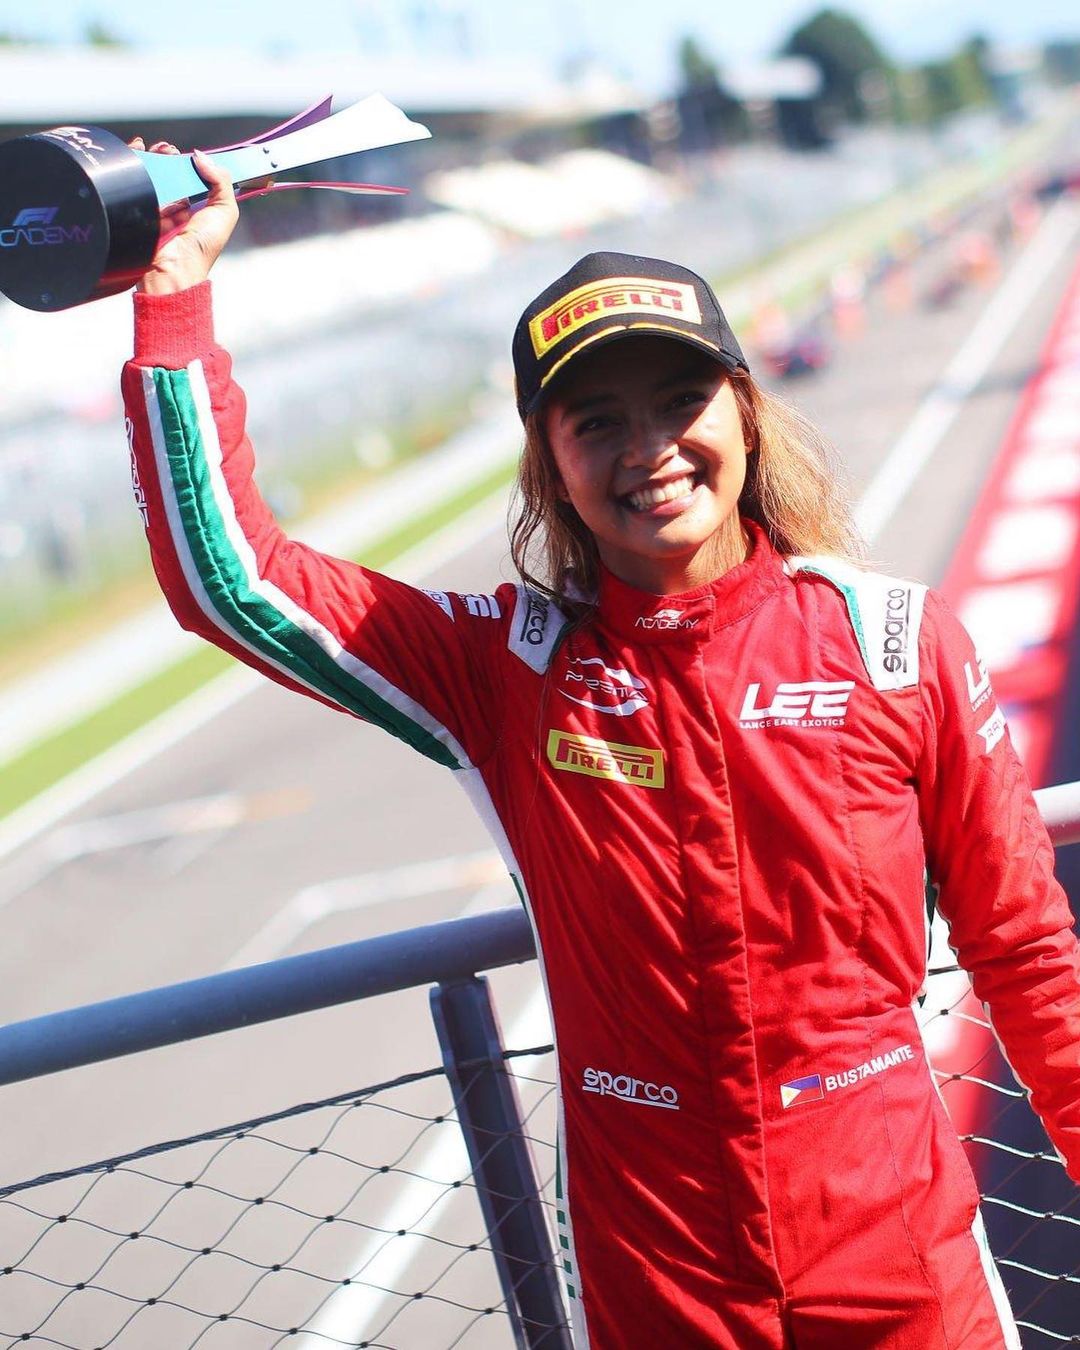 Bianca Bustamante wins her second victory at Monza, her favorite track